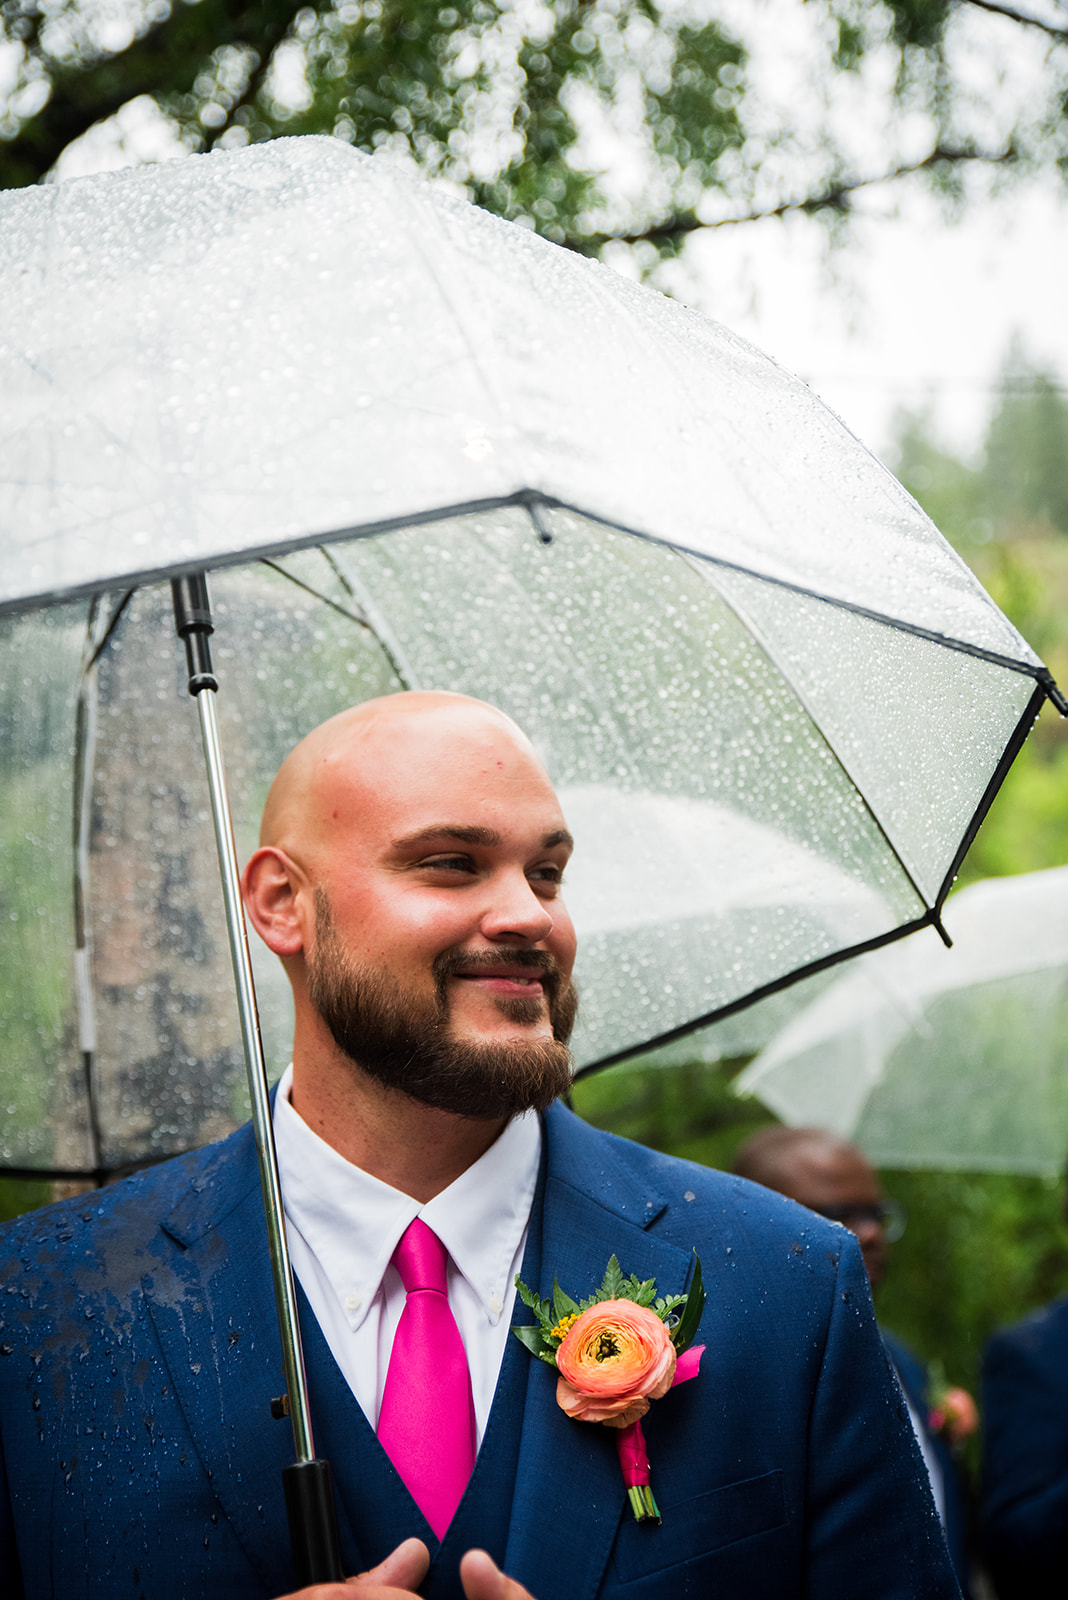 The groom stands looking at his bride walking down the aisle, holding a clear umbrella.